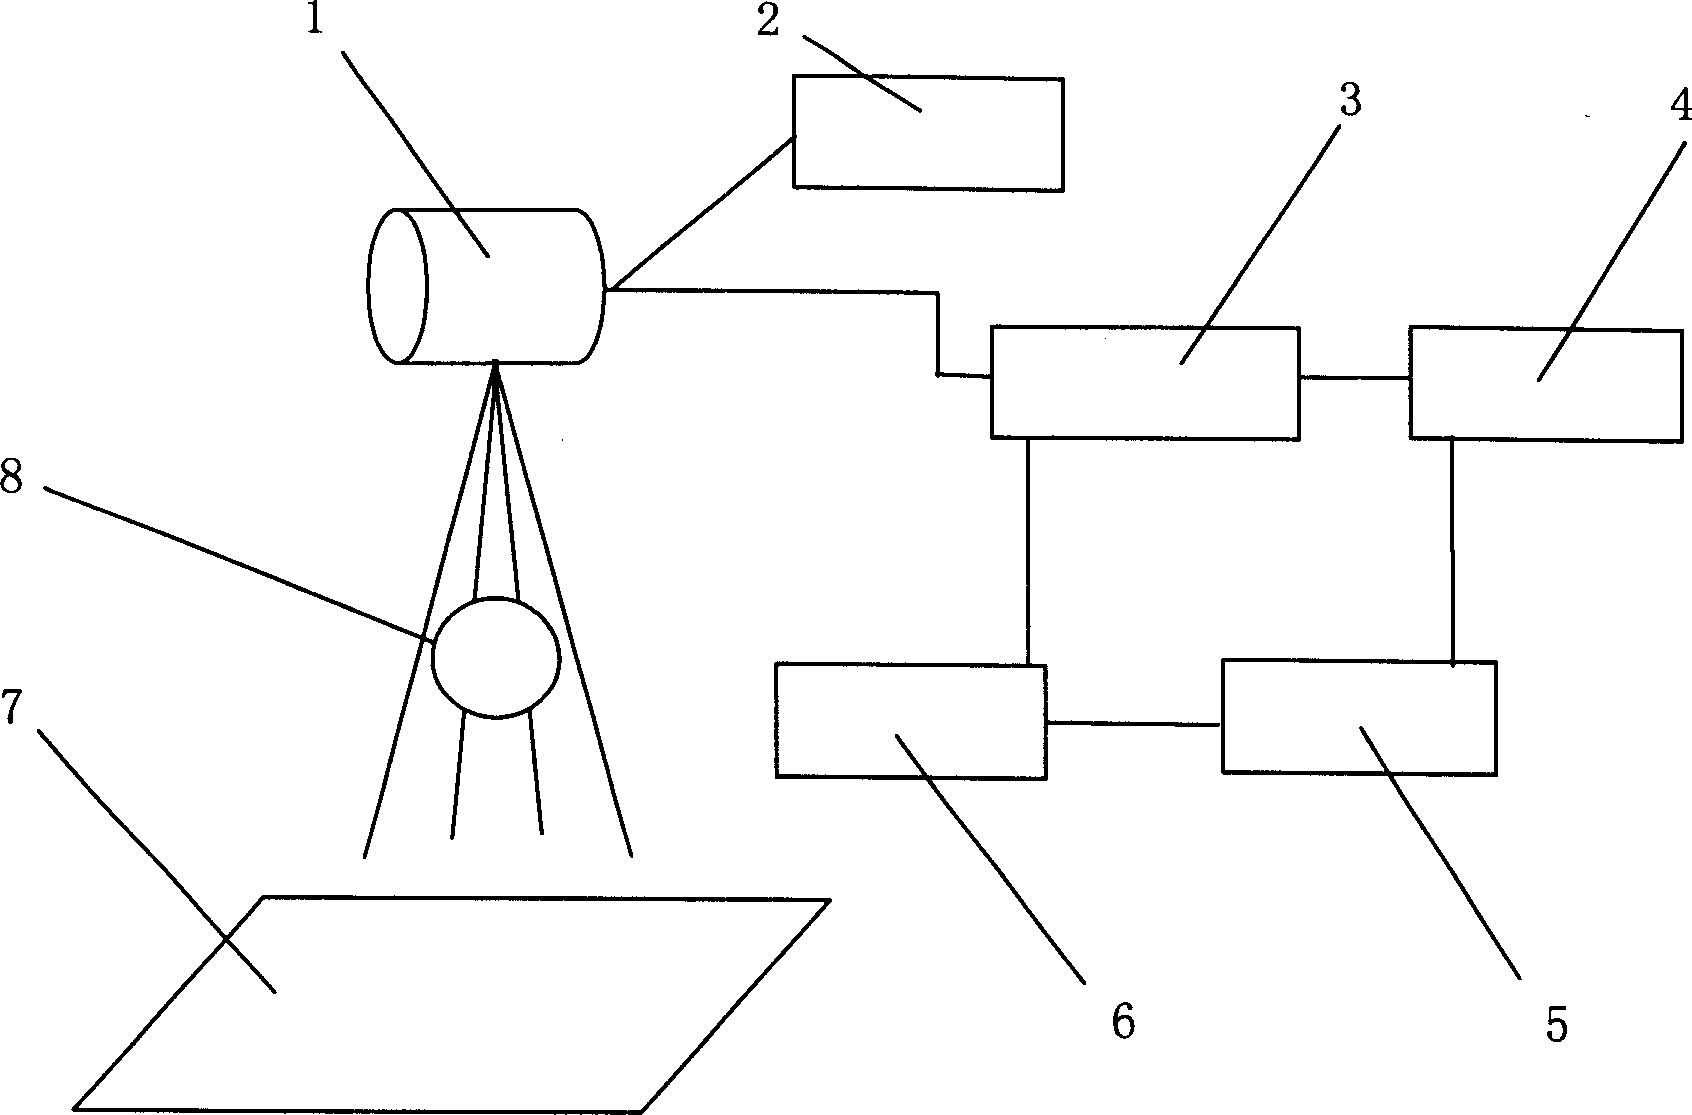 True three-dimensional volume imaging device with dual energy spectrum X-ray beam